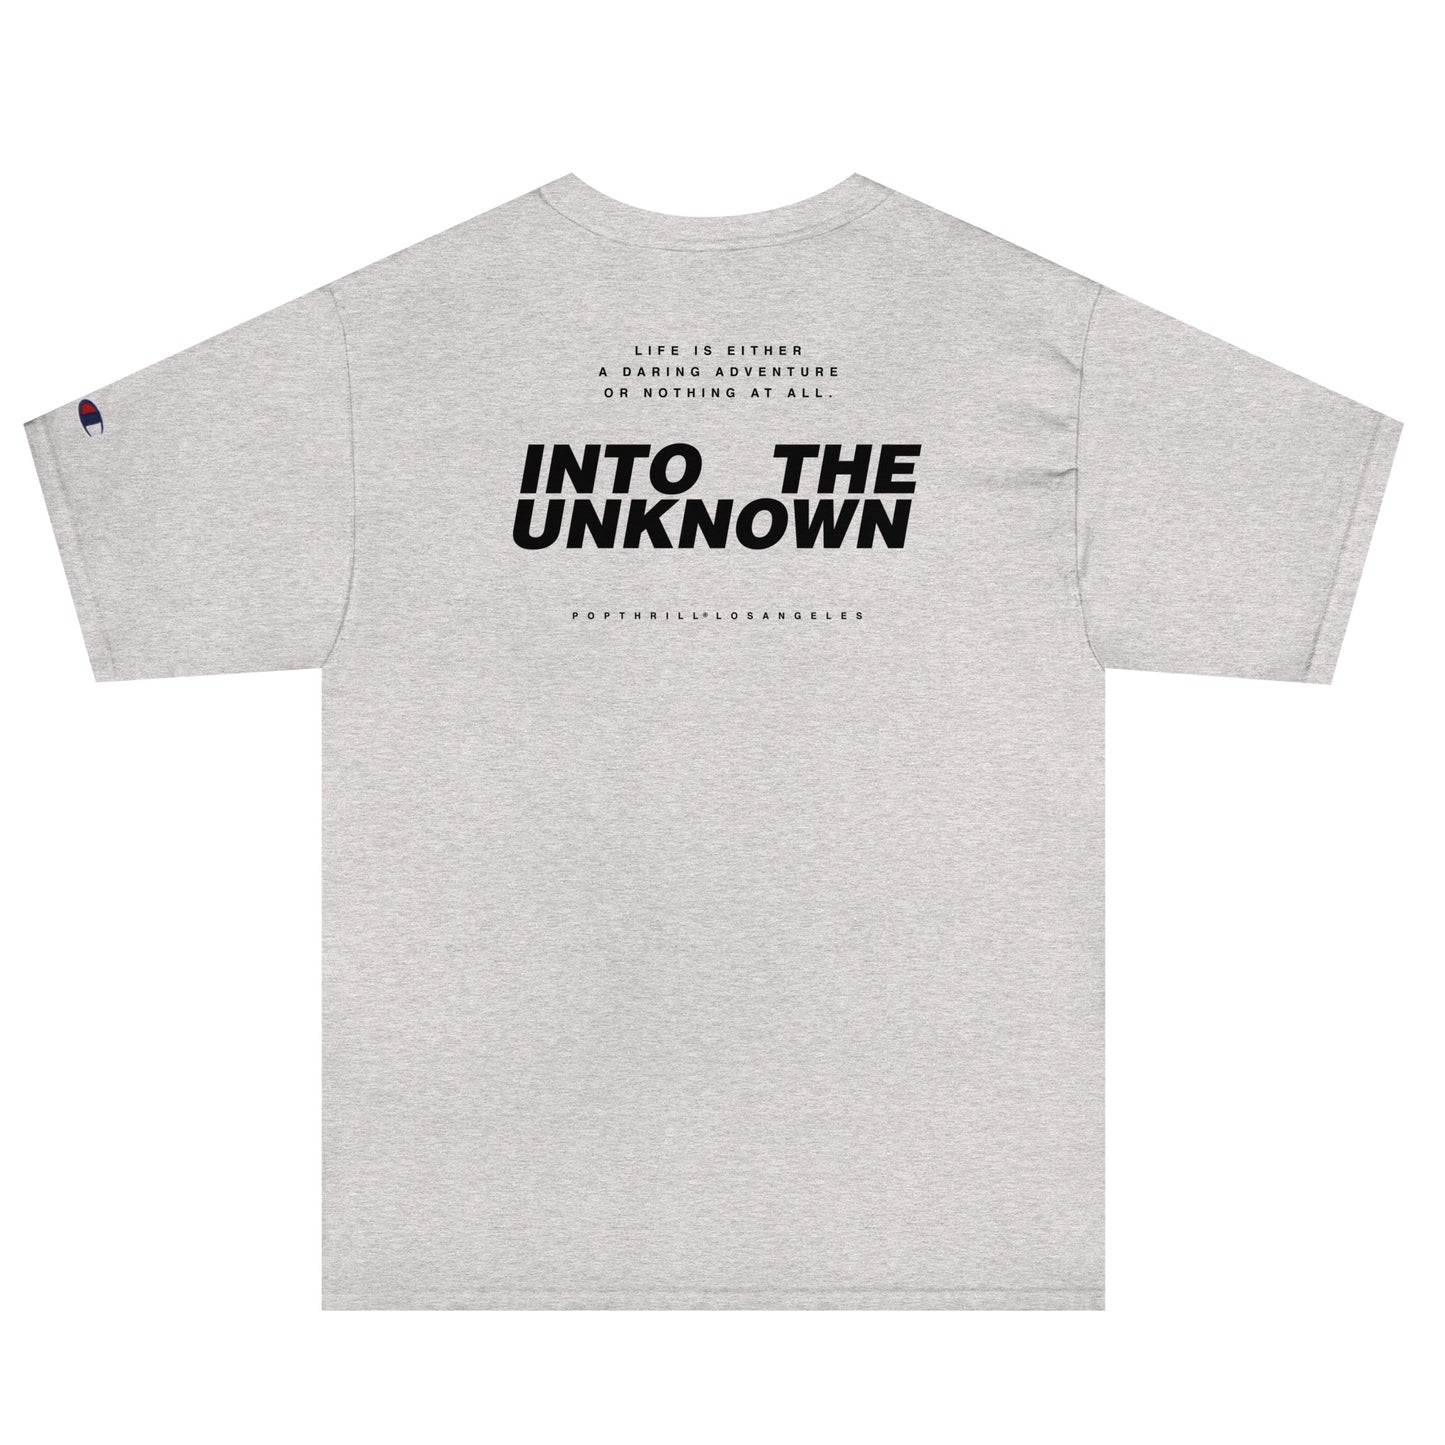 CHAMPION x POPTHRILL® MENS T-SHIRT - INTO THE UNKNOWN